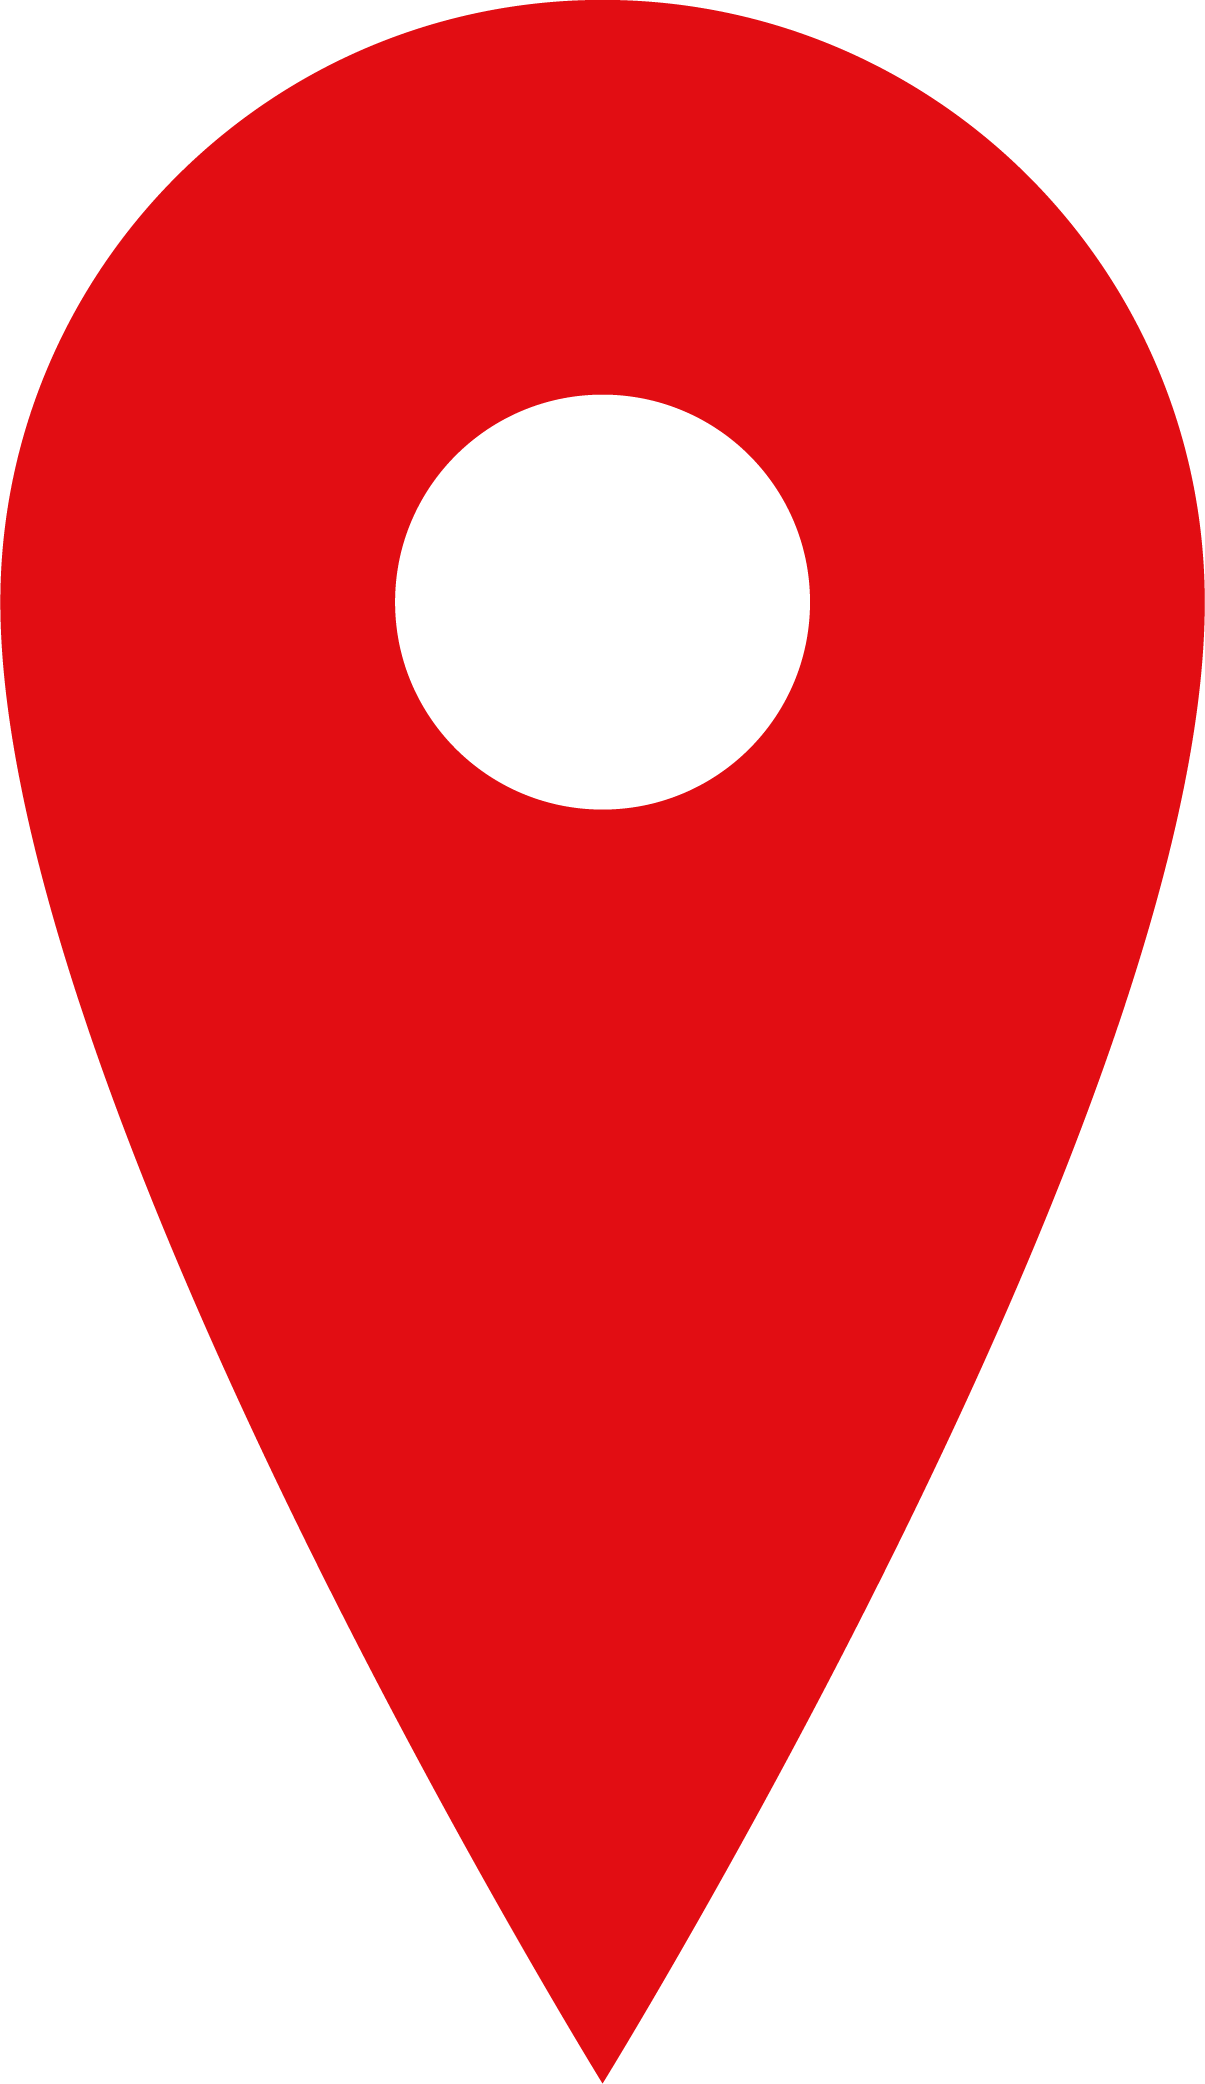 A Red And White Pin